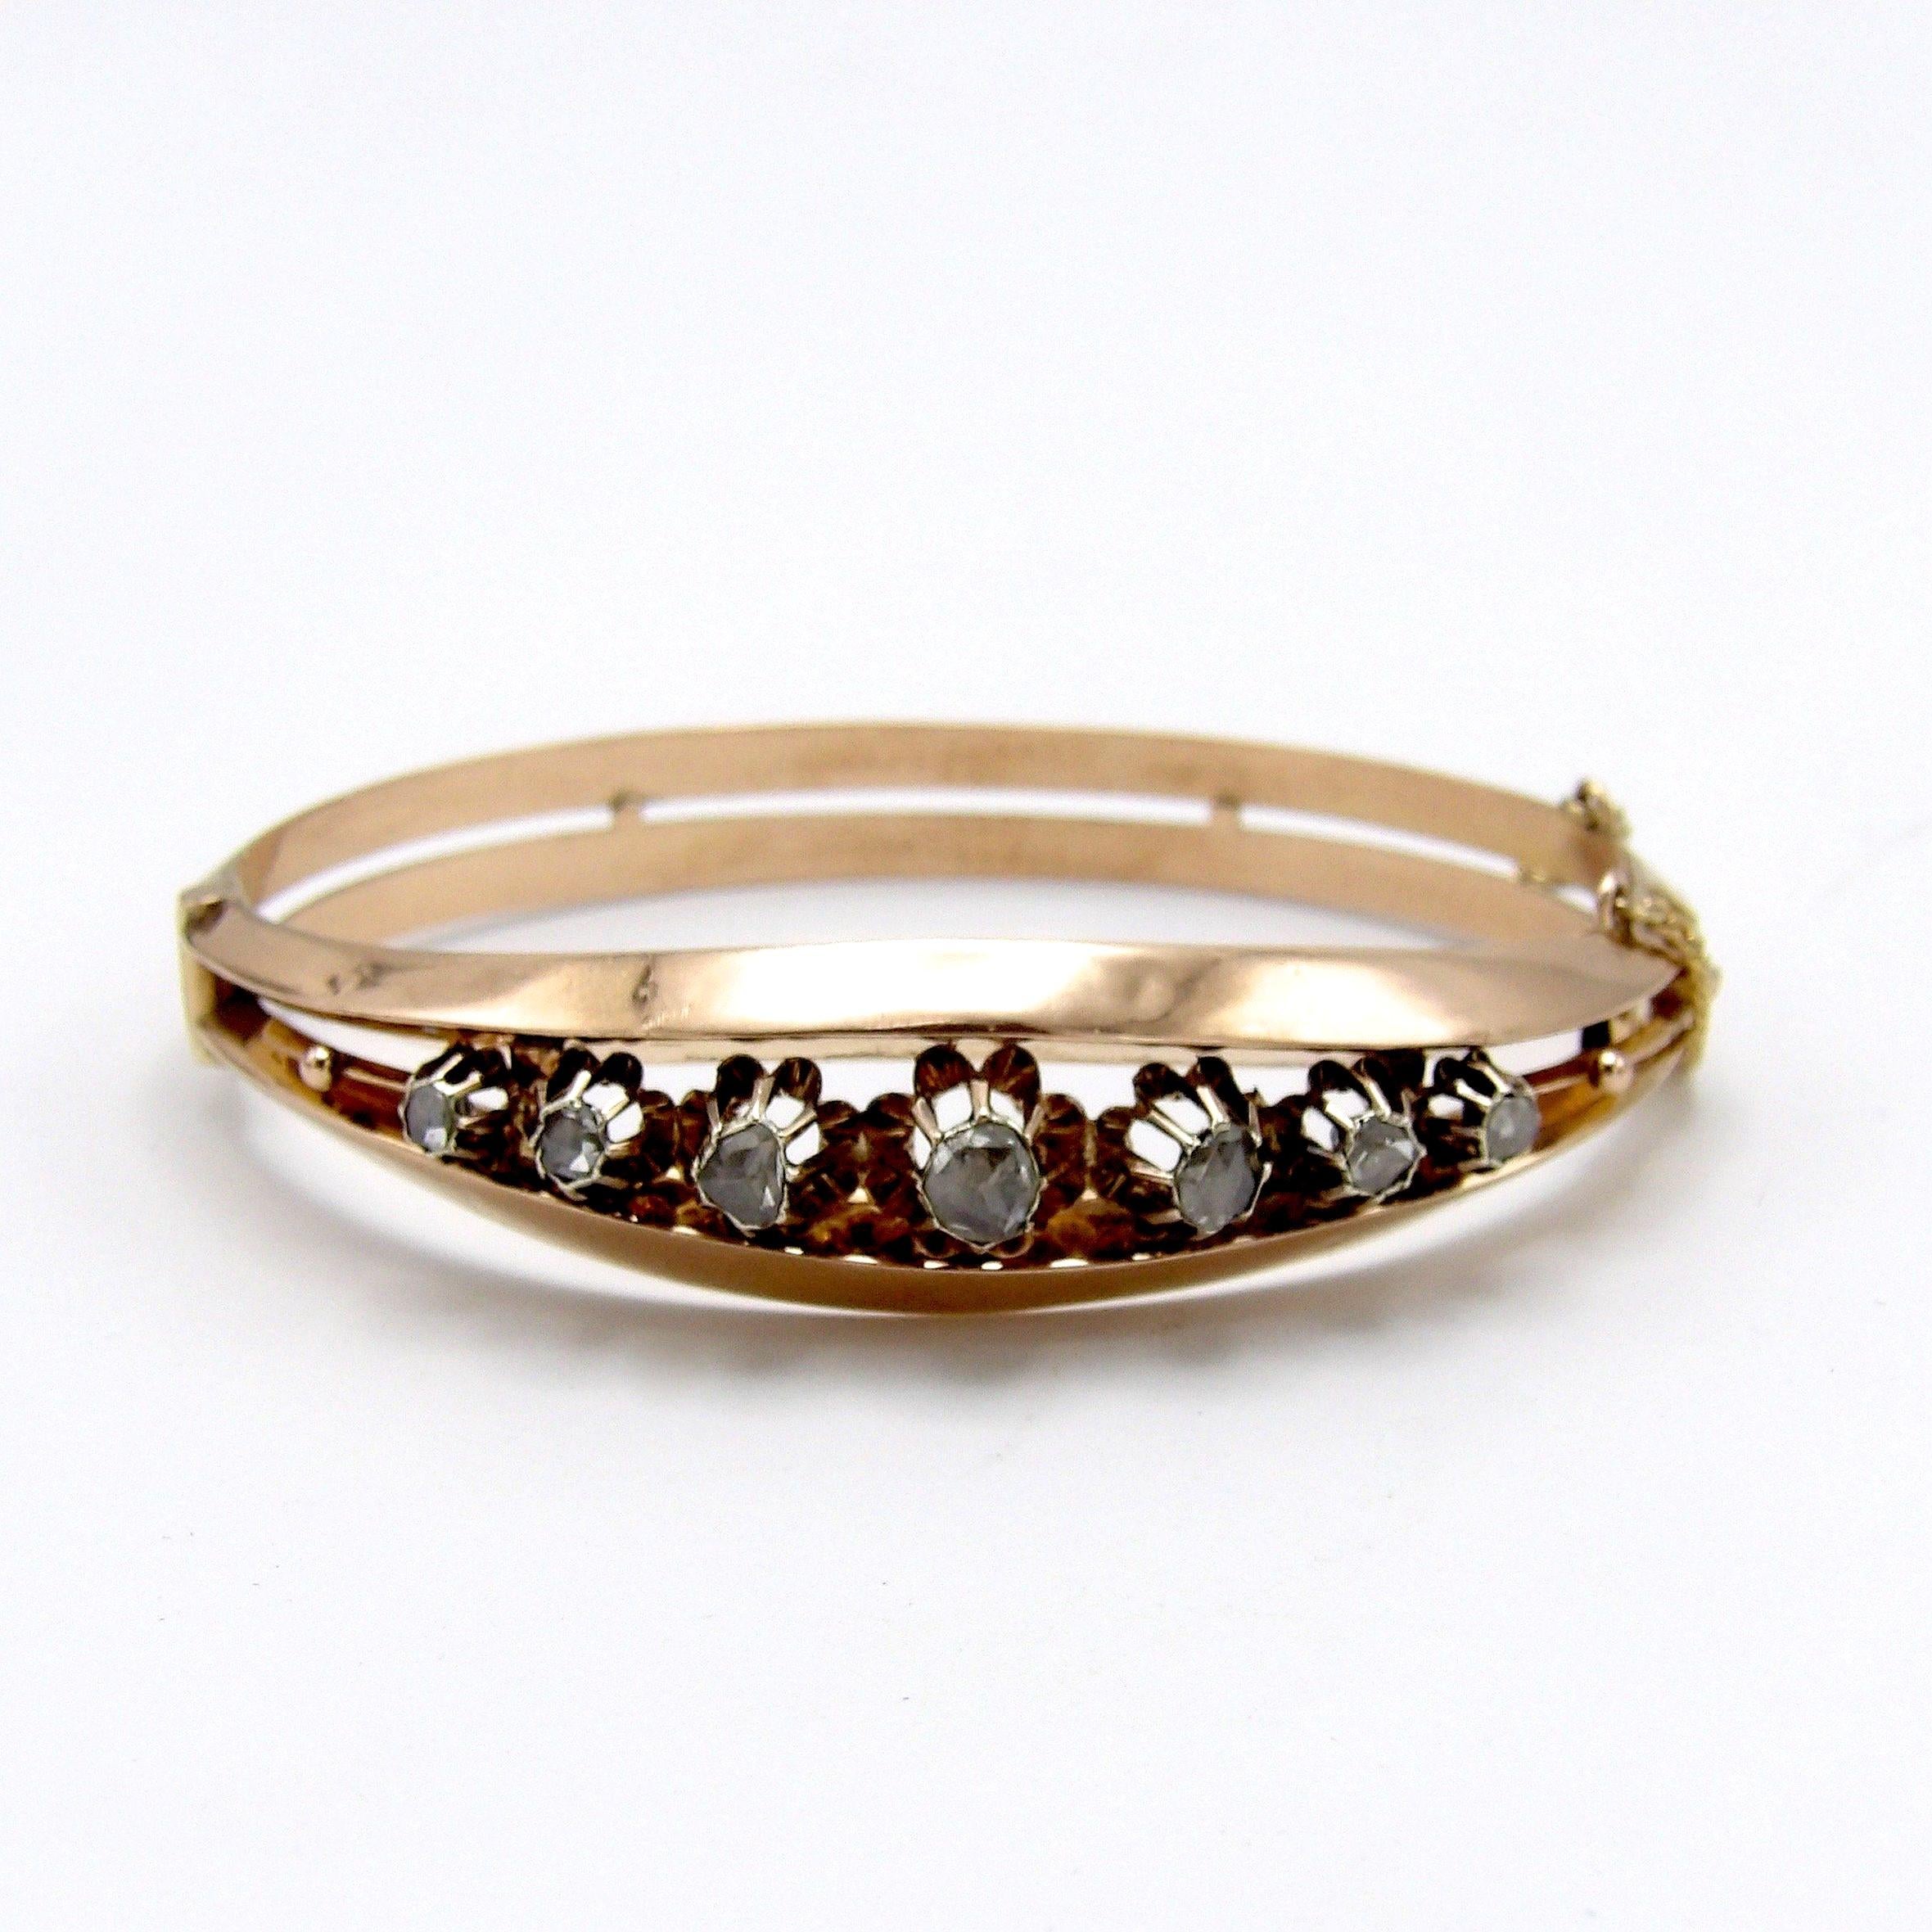 A beautiful rose gold and diamond bracelet from the Victorian era. This piece of jewelry features 7 gorgeous rose cut diamonds that are arranged from the center in a descending order. The largest diamond at the center measures 4.9 mm in diameter and